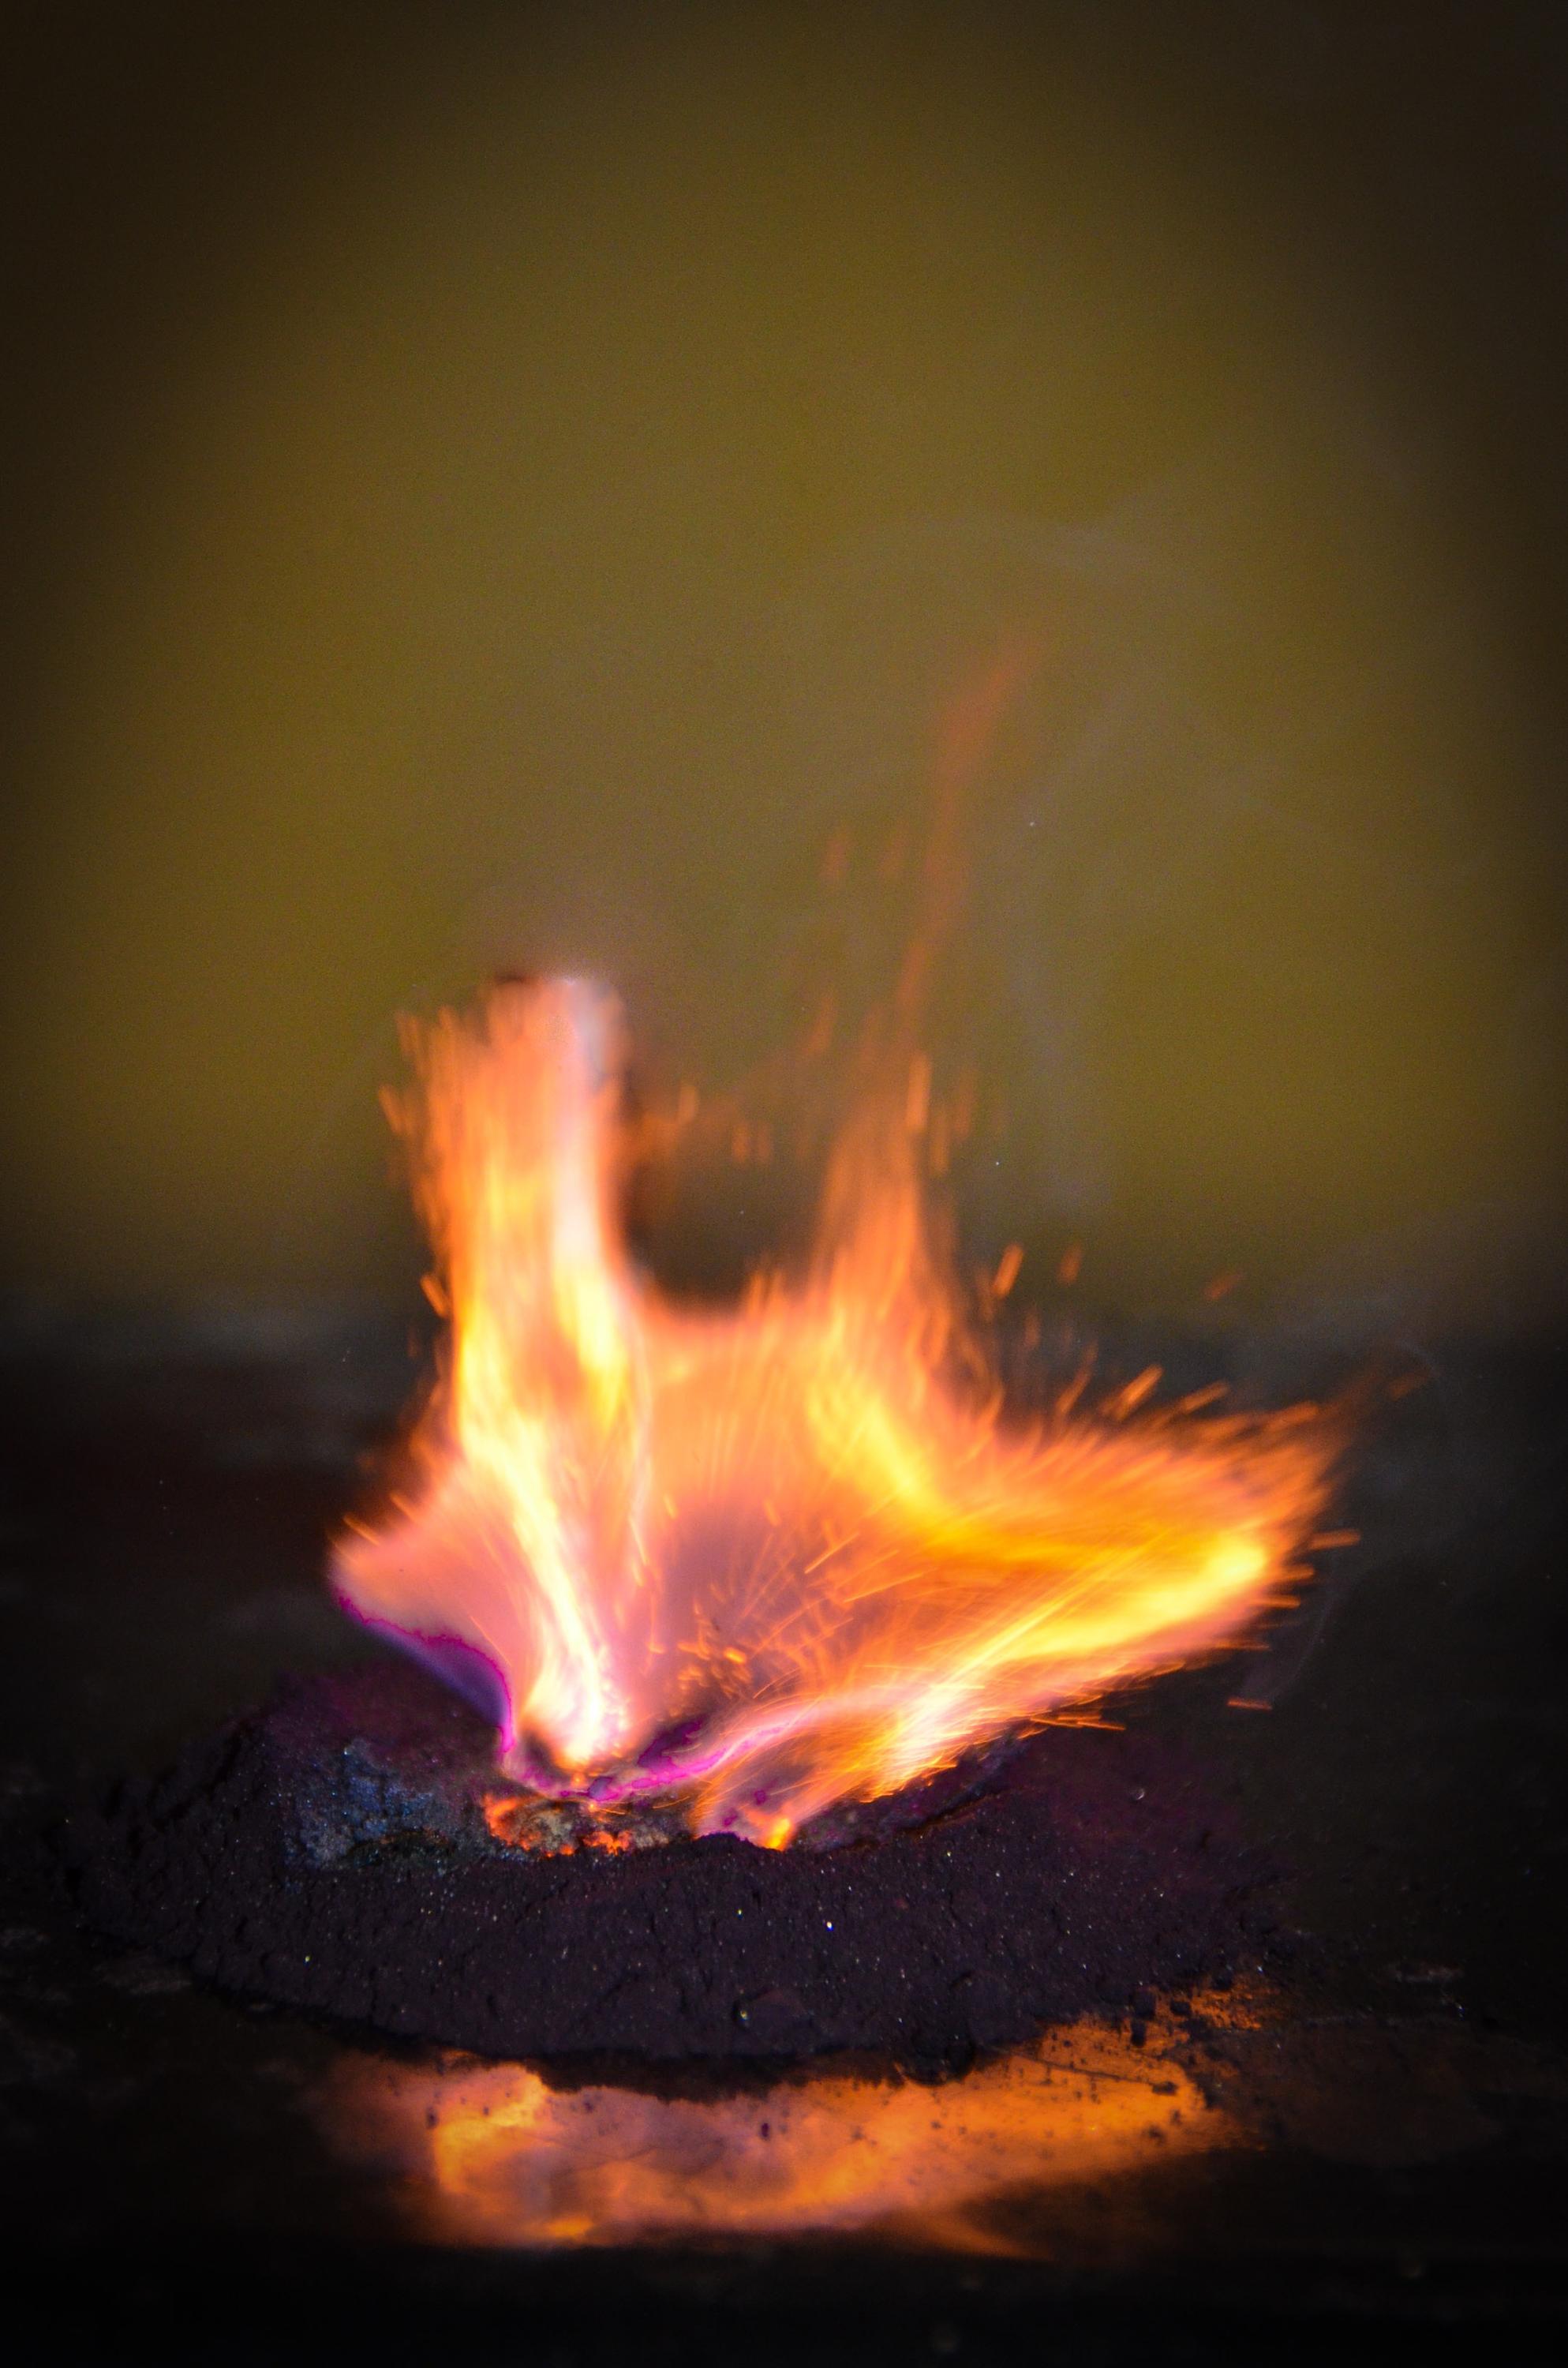 large orange flame coming out a small pile of grey powder